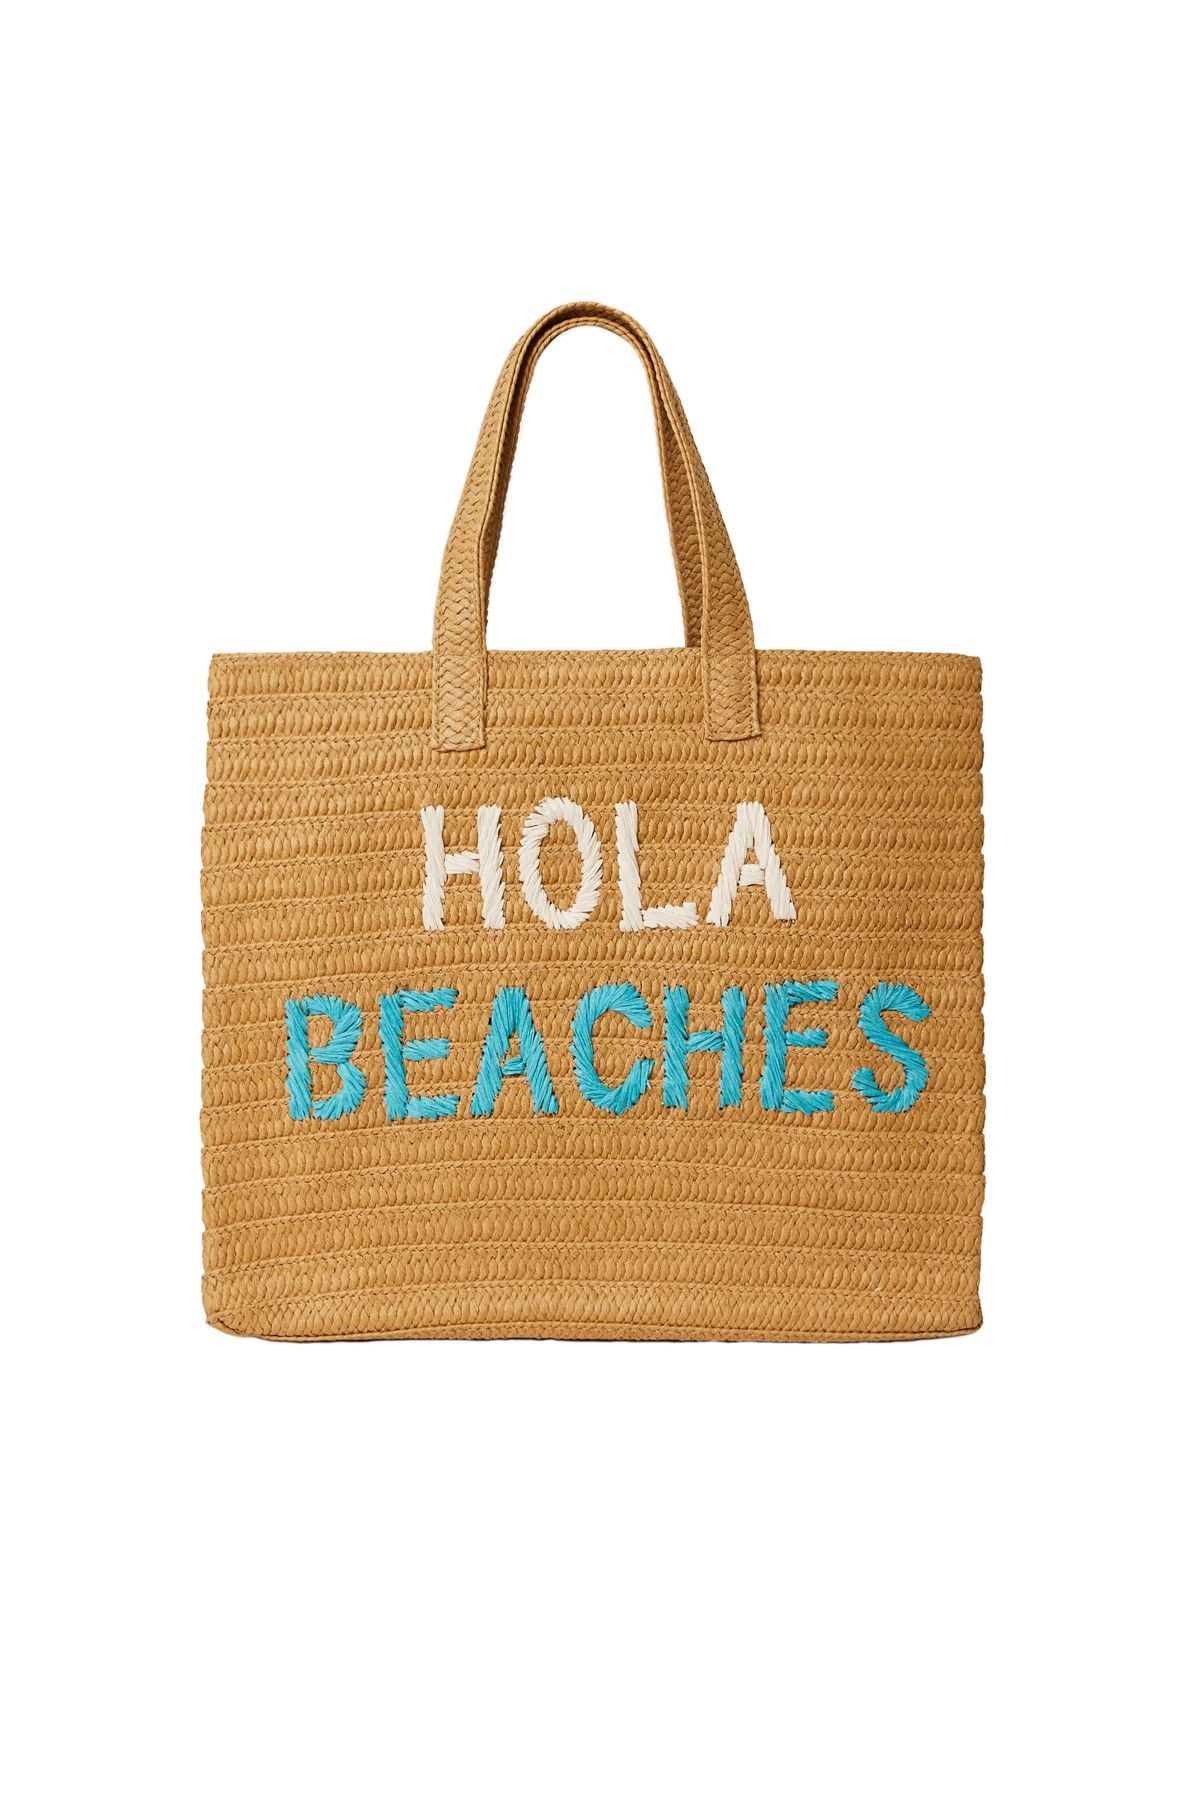 Hola Beaches Tote | Everything But Water